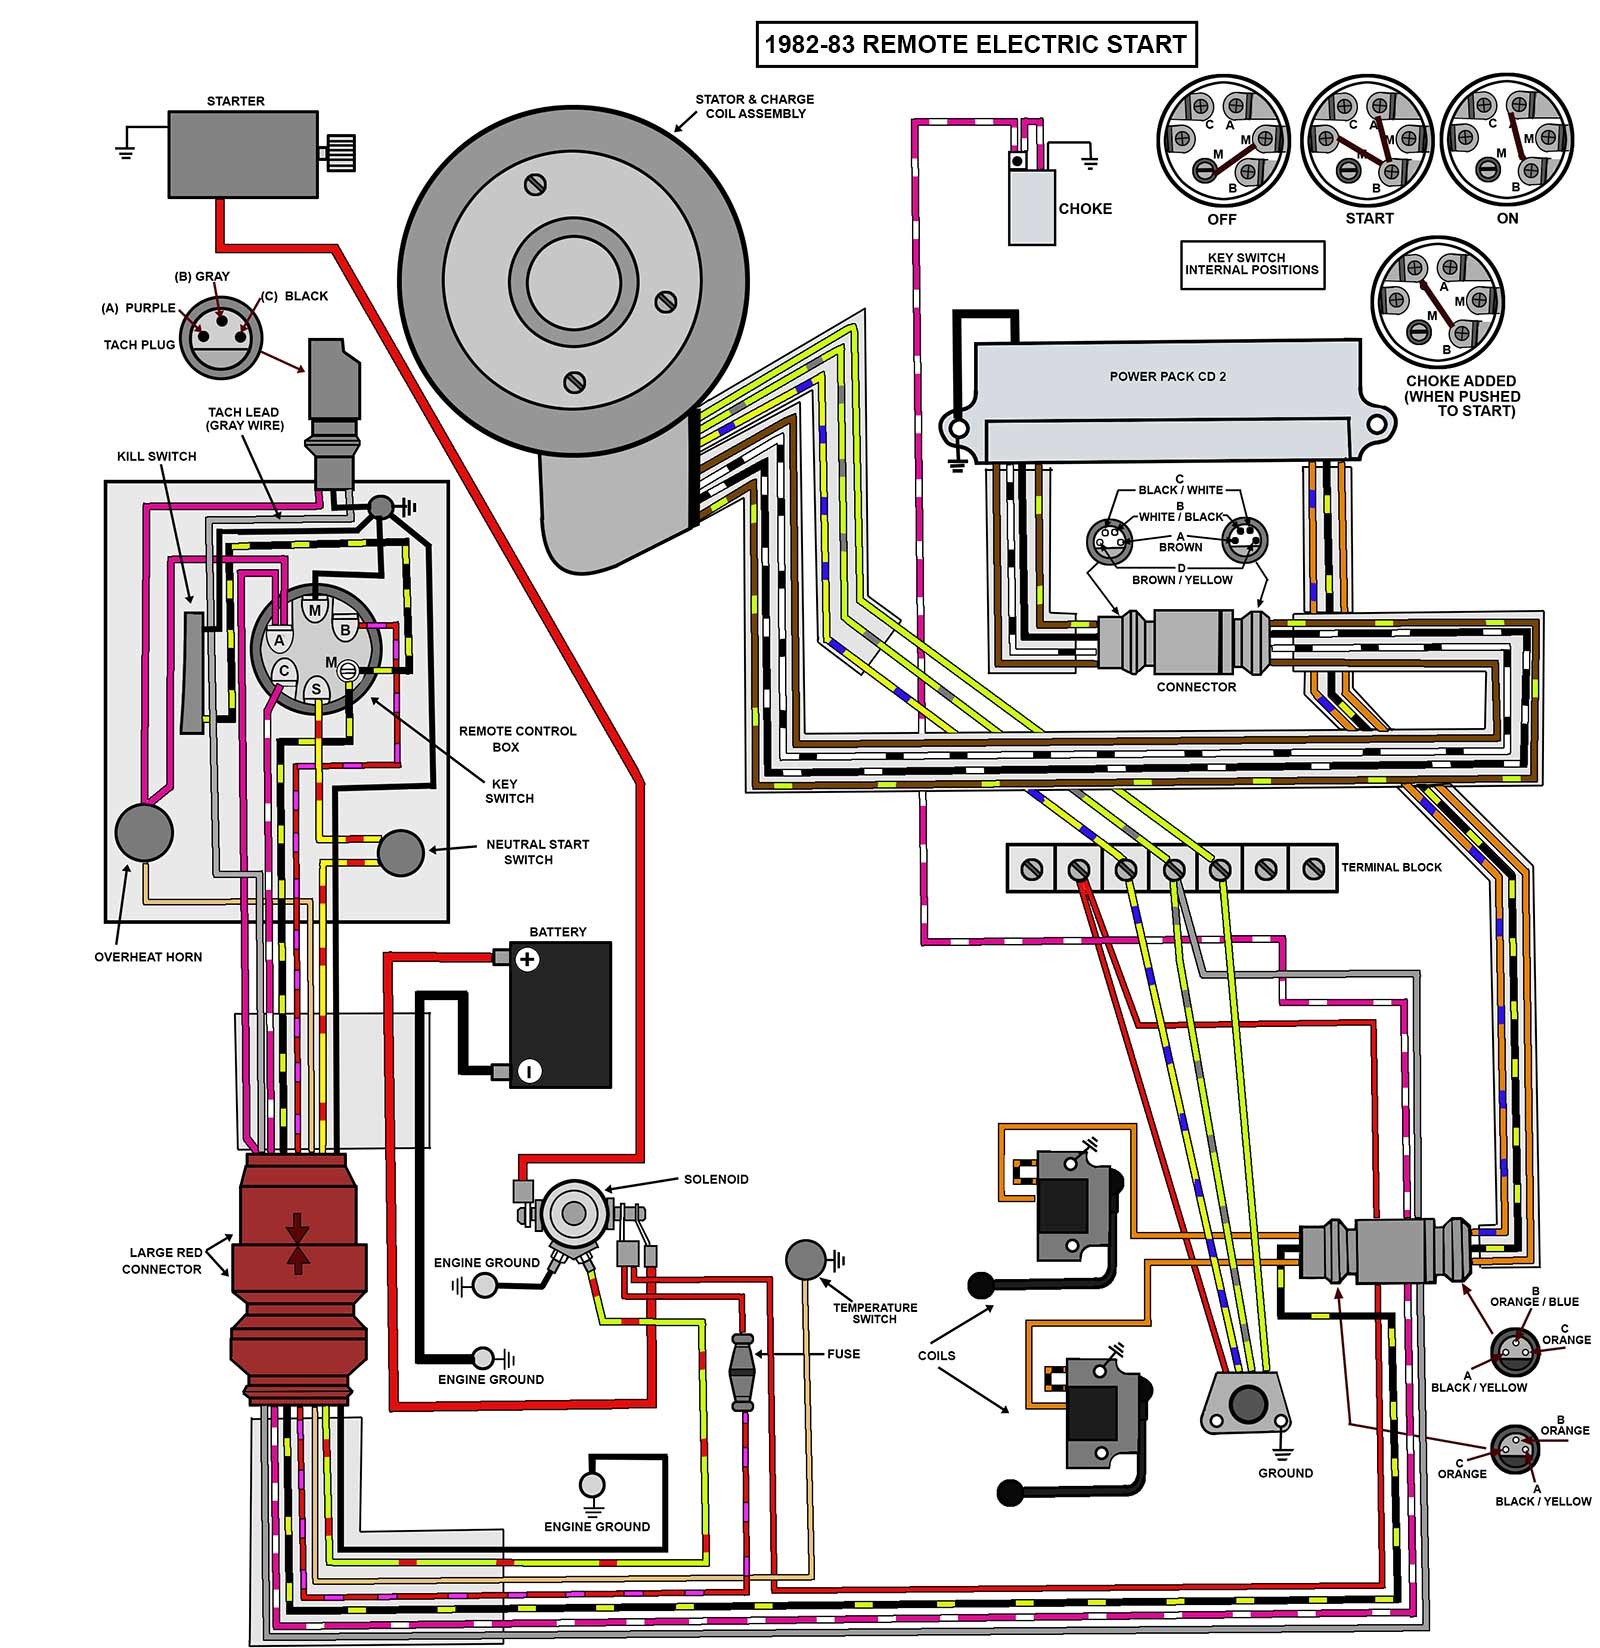 Astonishing Evinrude Wiring Diagram Outboards 57 About Remodel 3 Phase Plug Wiring Diagram Australia with Evinrude Wiring Diagram Outboards